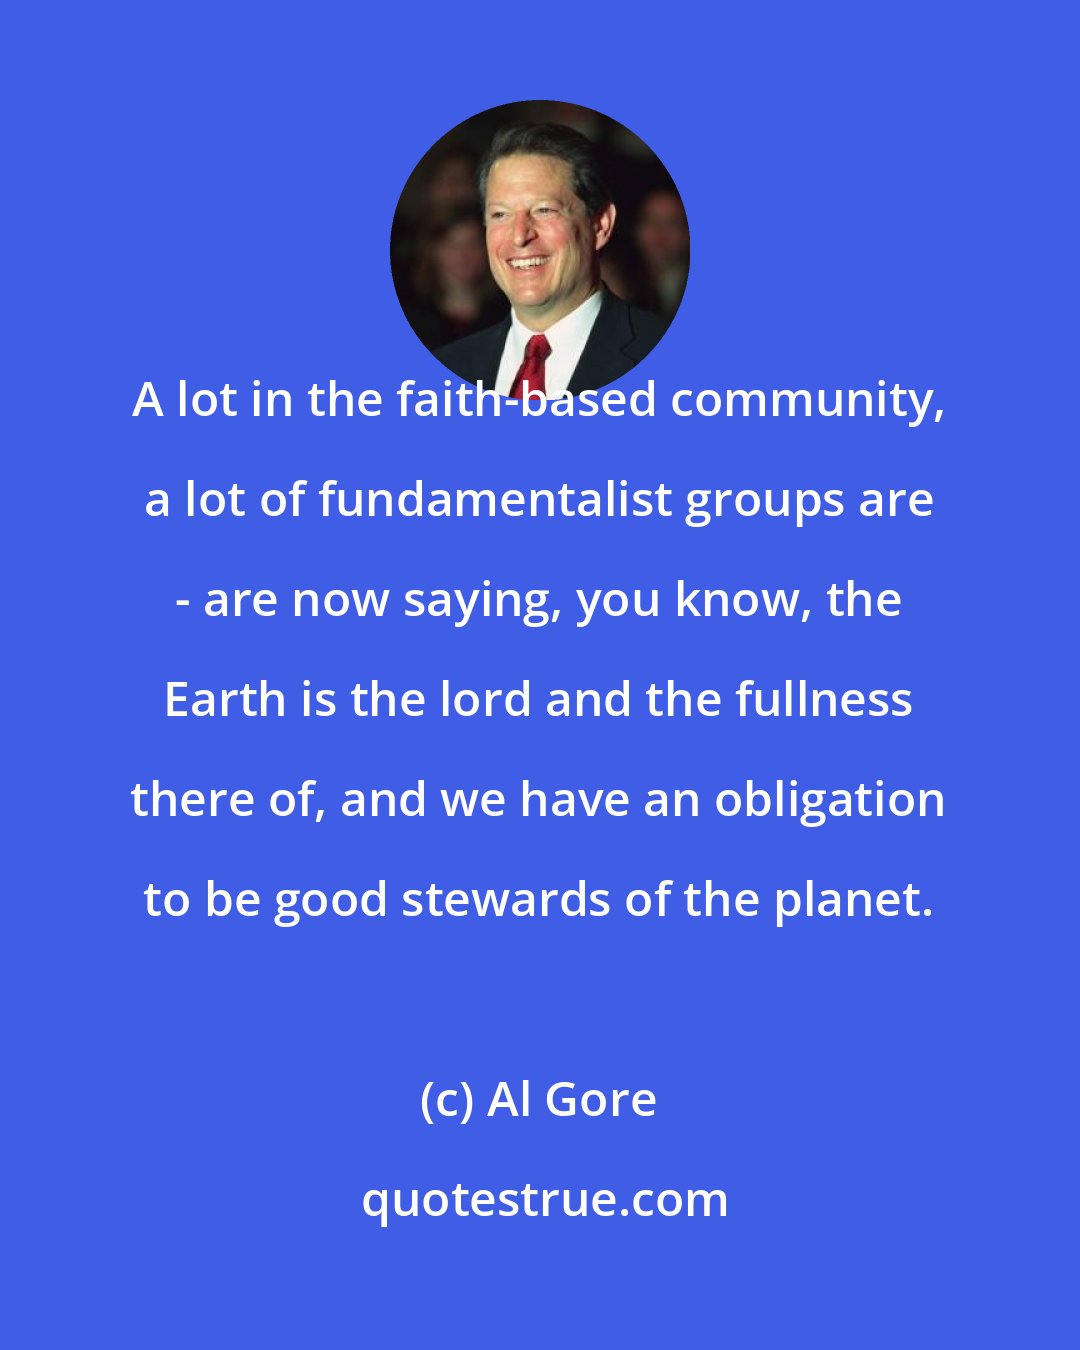 Al Gore: A lot in the faith-based community, a lot of fundamentalist groups are - are now saying, you know, the Earth is the lord and the fullness there of, and we have an obligation to be good stewards of the planet.